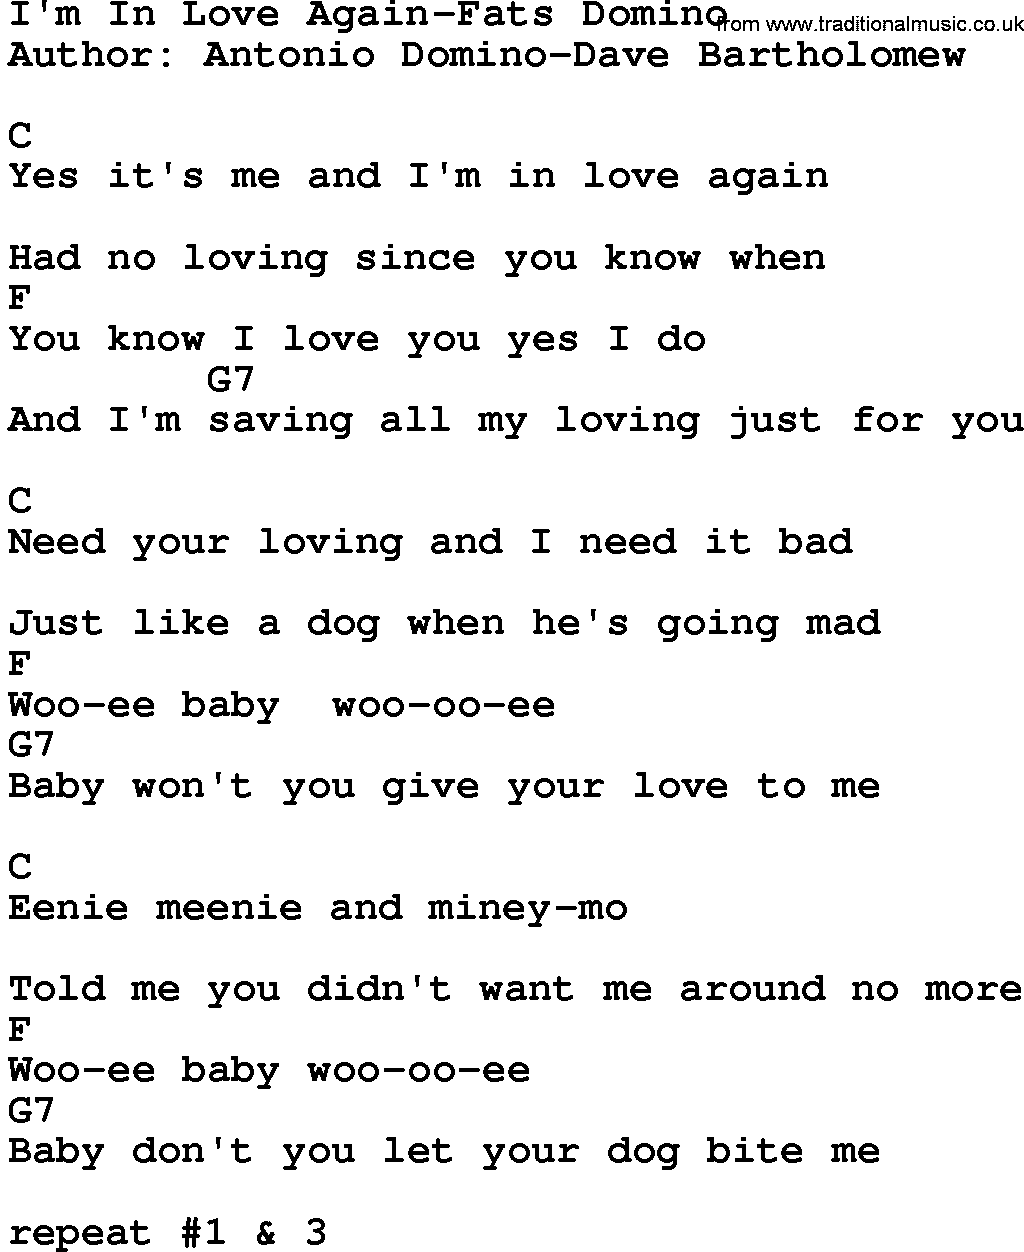 Country music song: I'm In Love Again-Fats Domino lyrics and chords